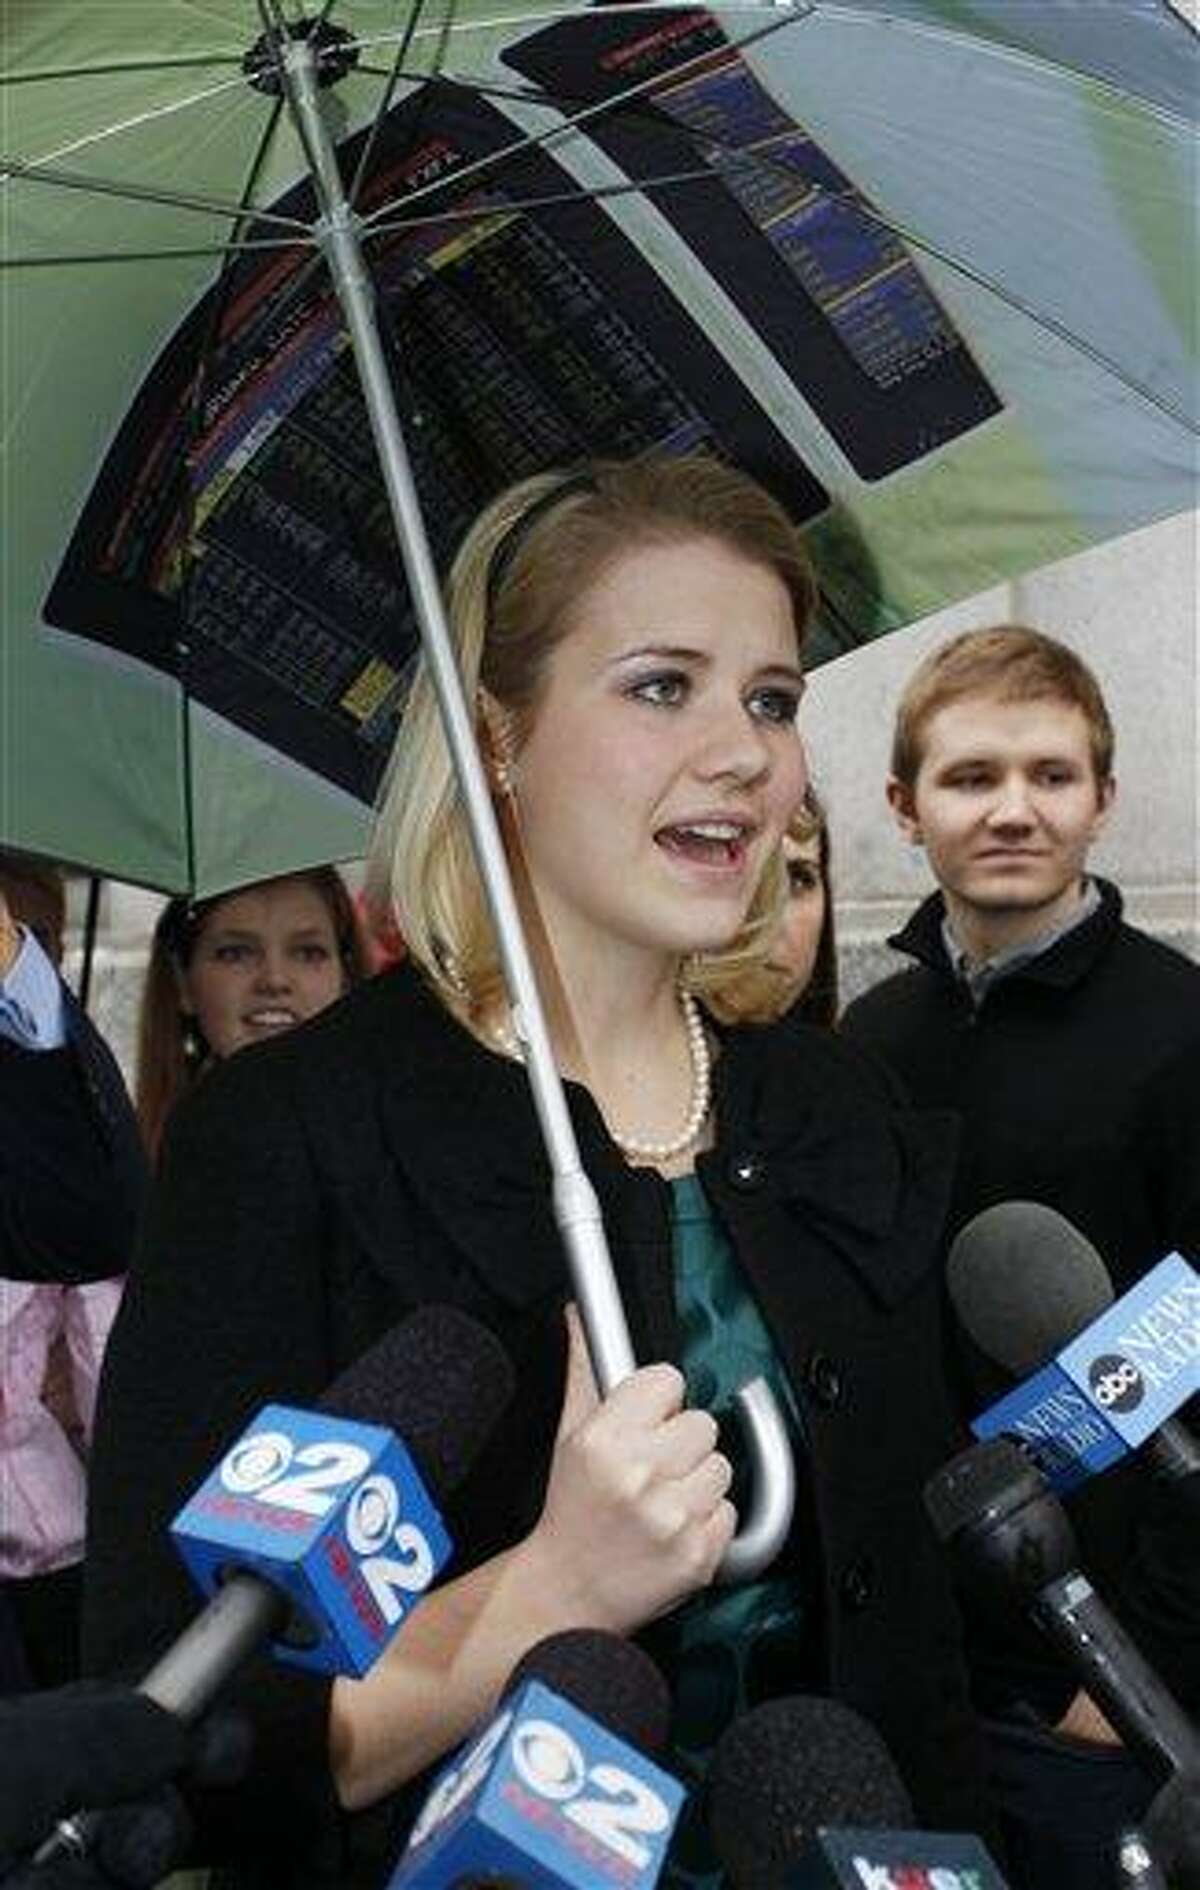 Elizabeth Smart speaks to the media following the guilty verdict in the Brian David Mitchell trail outside the federal court house Friday, Dec. 10 2010 in Salt Lake City. Mitchell was found guilty for the June 5 2002 kidnapping of Elizabeth Smart. (AP Photo/Colin E Braley)